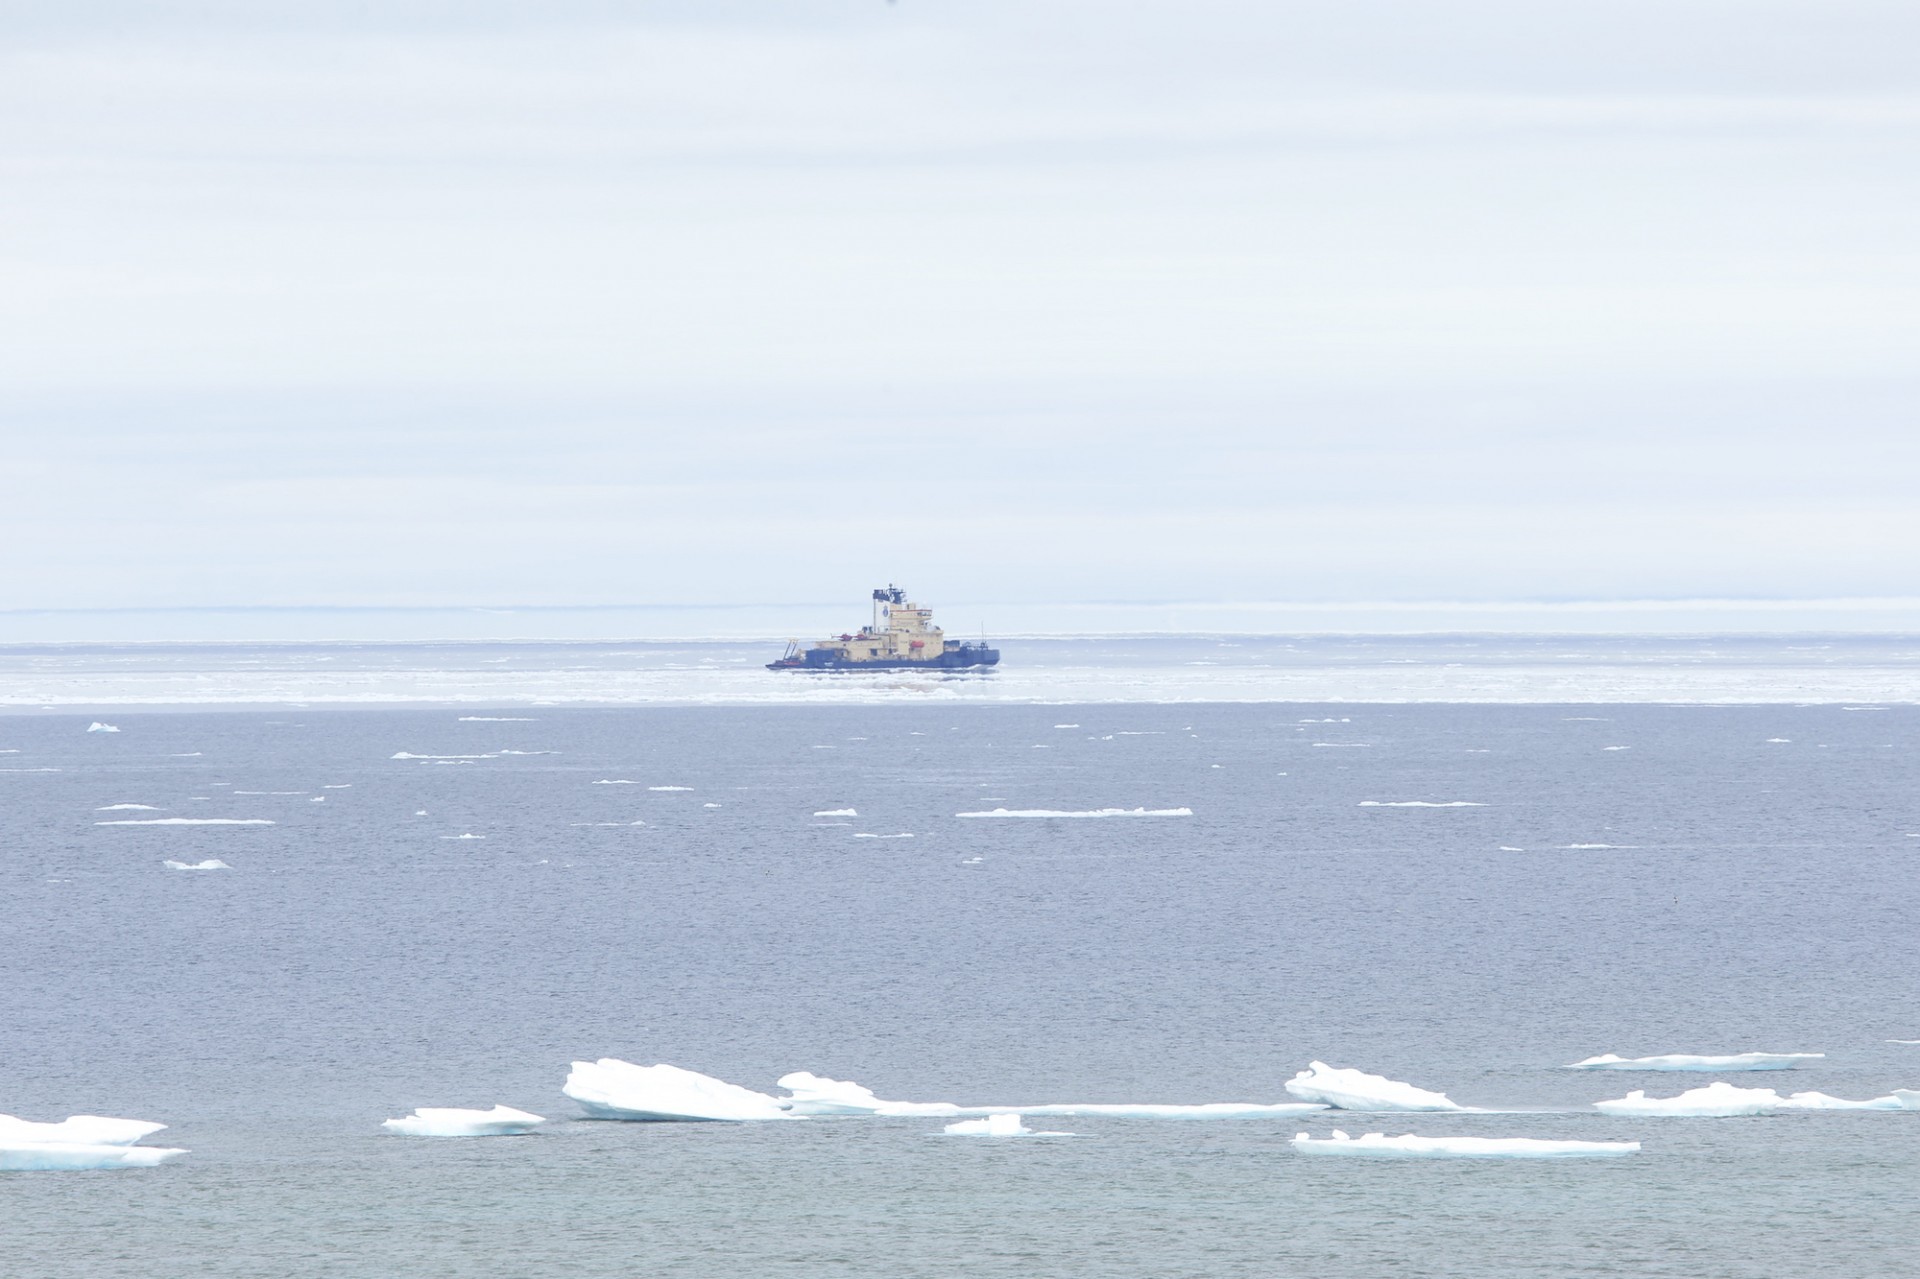 The Oden Ship on the Northwest Passage just outside Cunnignham Inlet. The ship staff failed to land once clearly flagged by Weber Arctic's team.